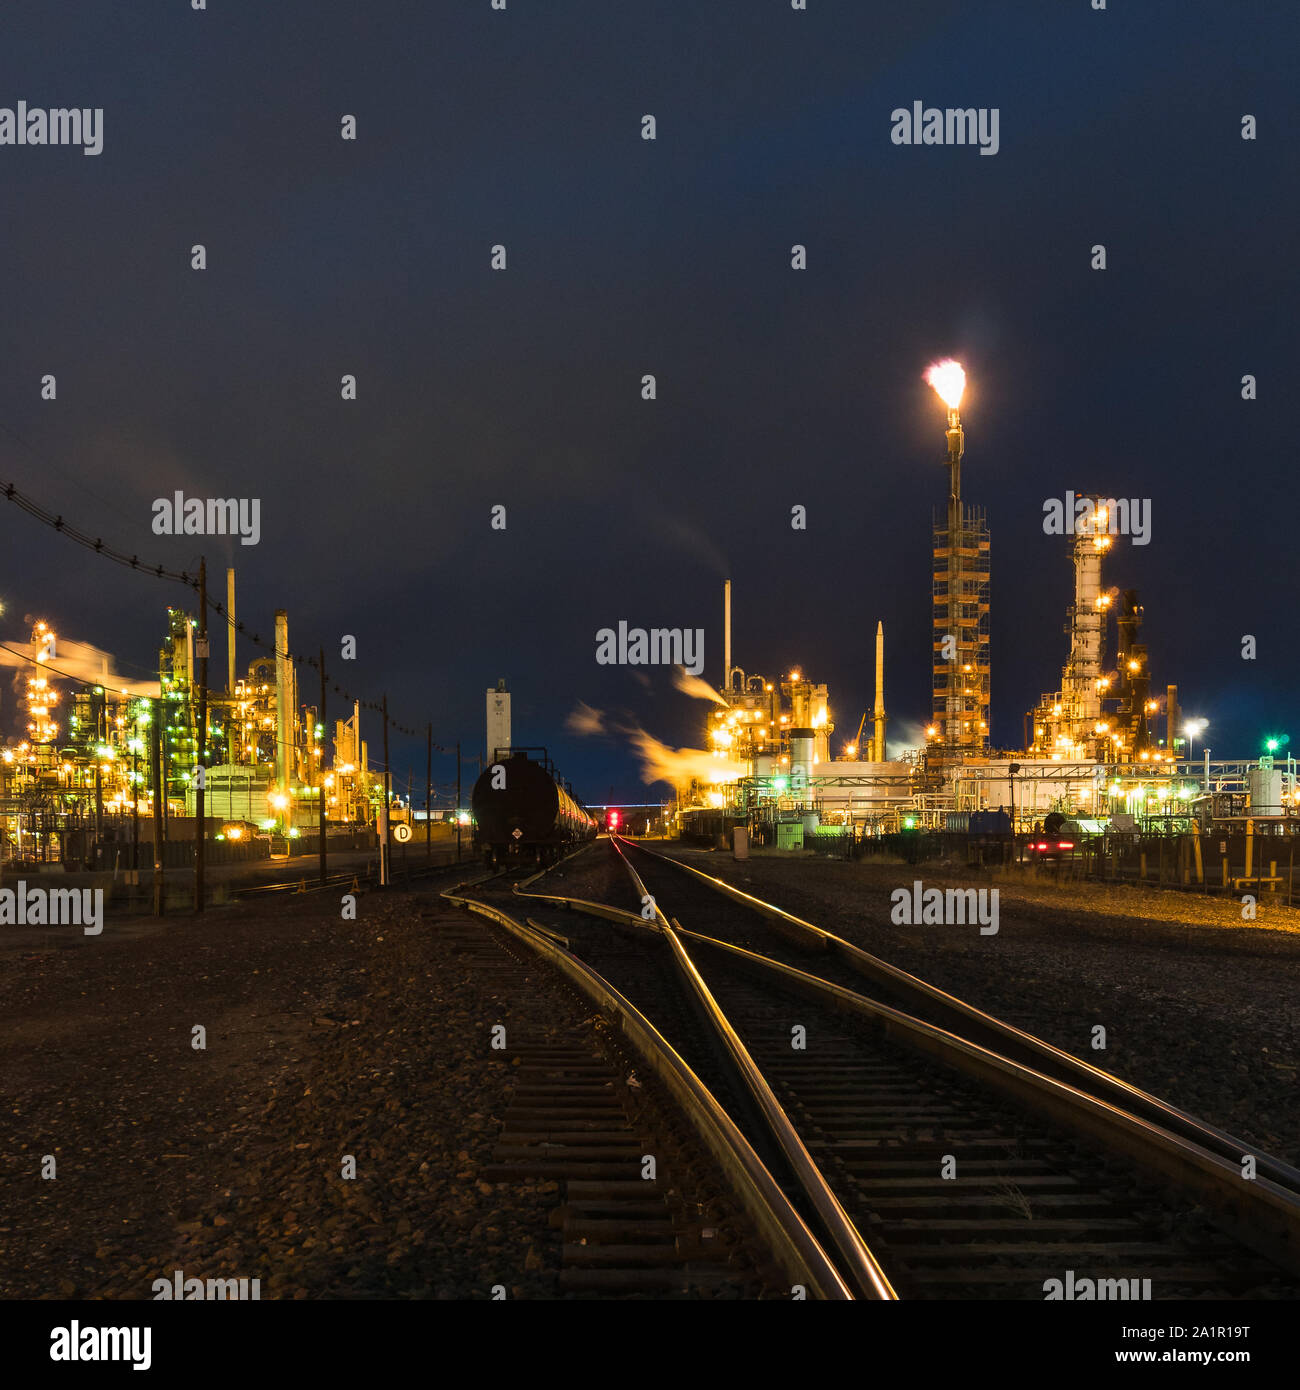 Train Tracks leading to industrial stacks Stock Photo